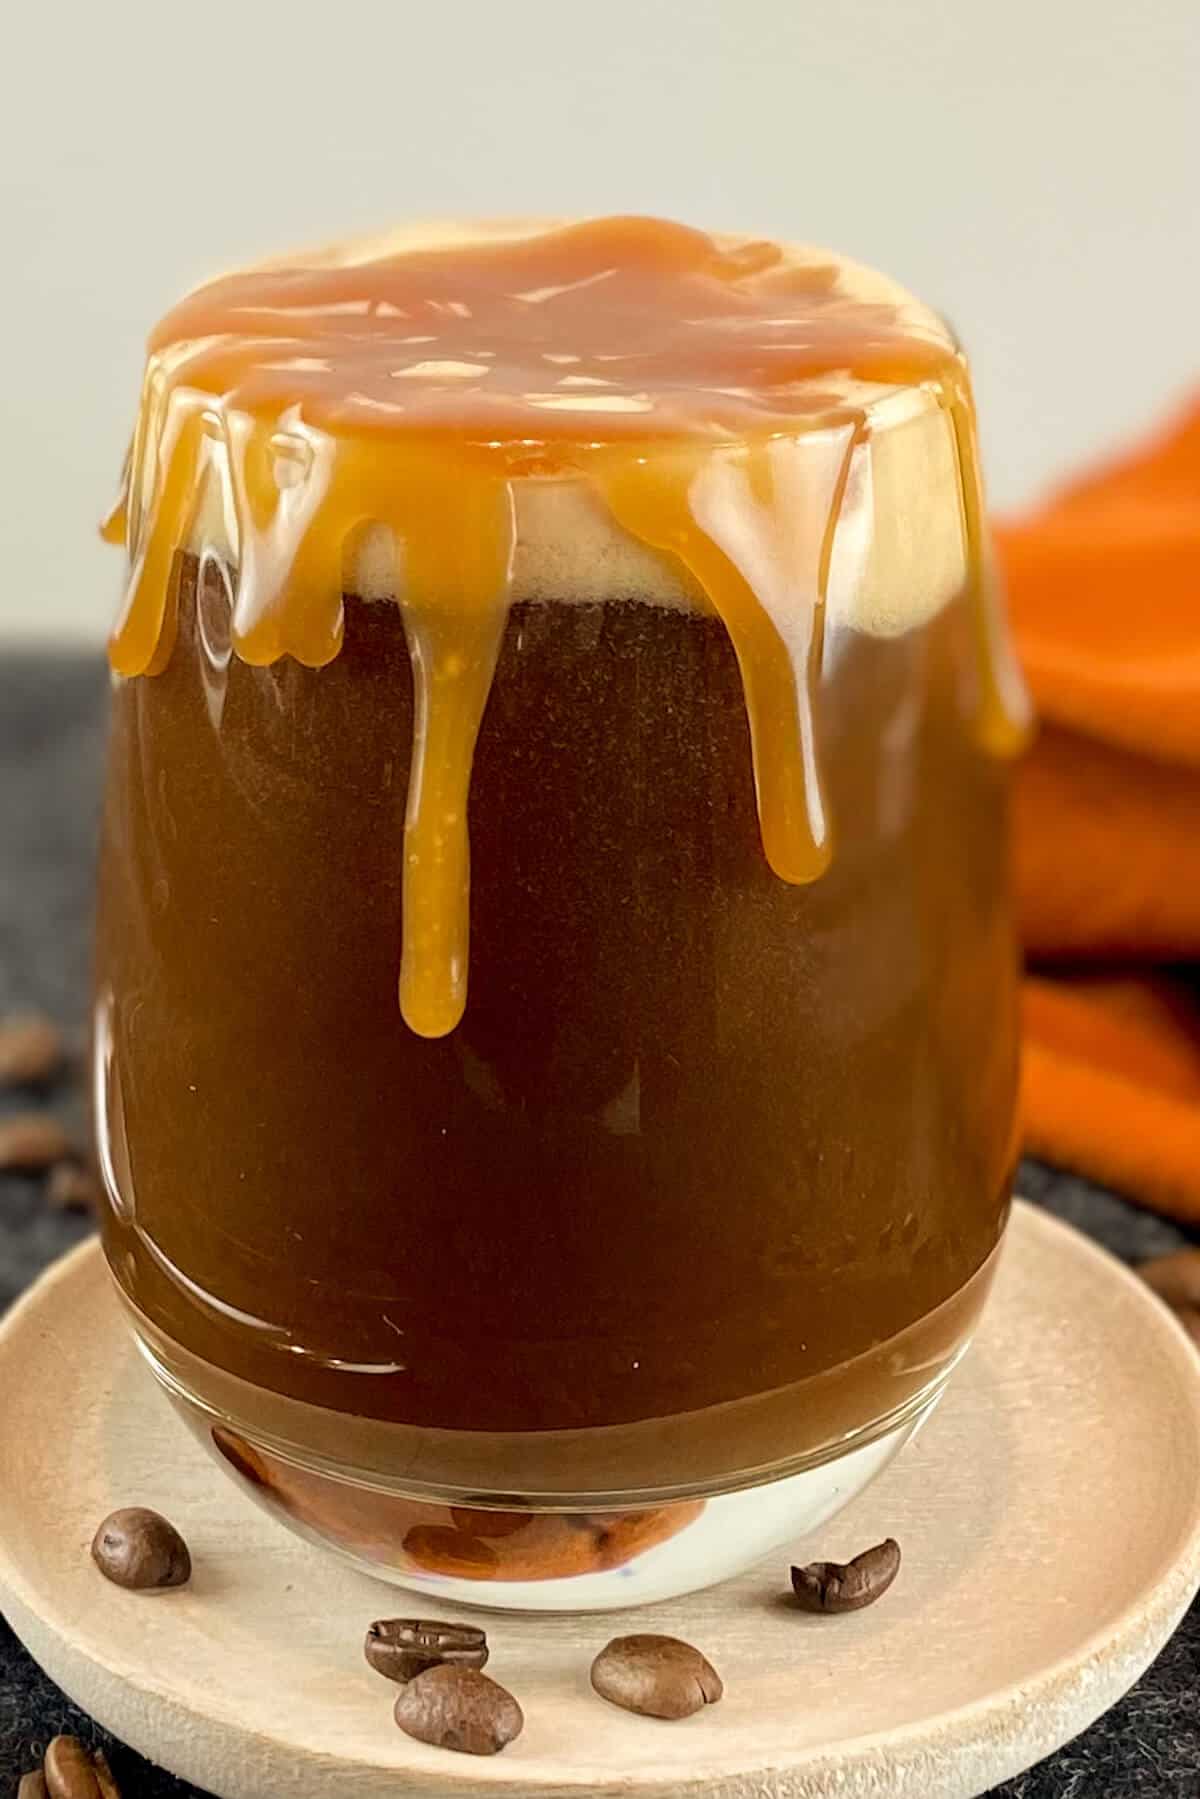 Caramel sauce dripping down sides of cup.